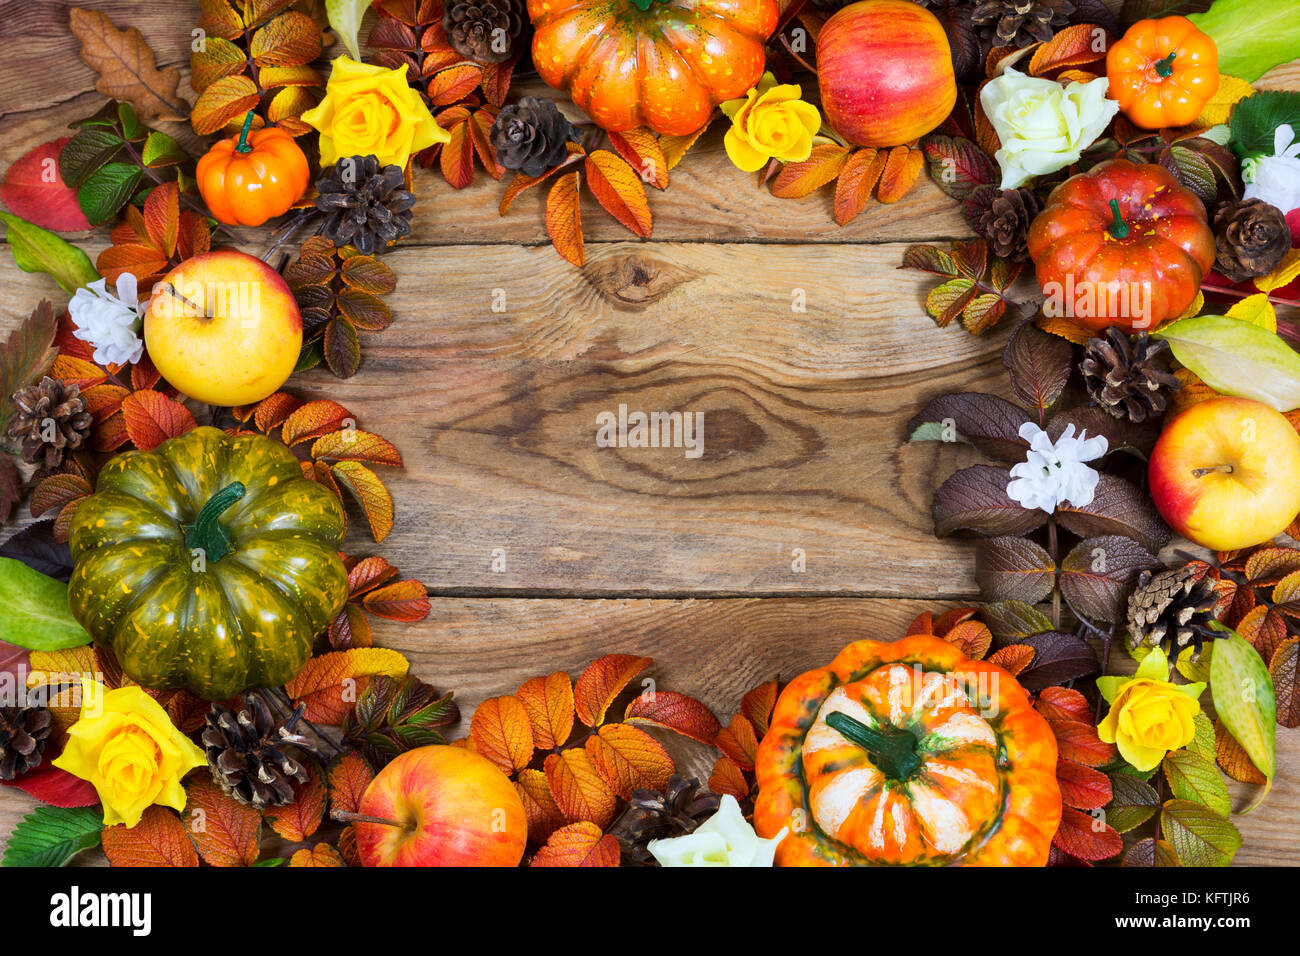 Border of pumpkins, apples, pine cones, colorful fall leaves, yellow roses and white flower on the rustic wooden background, copy space Stock Photo